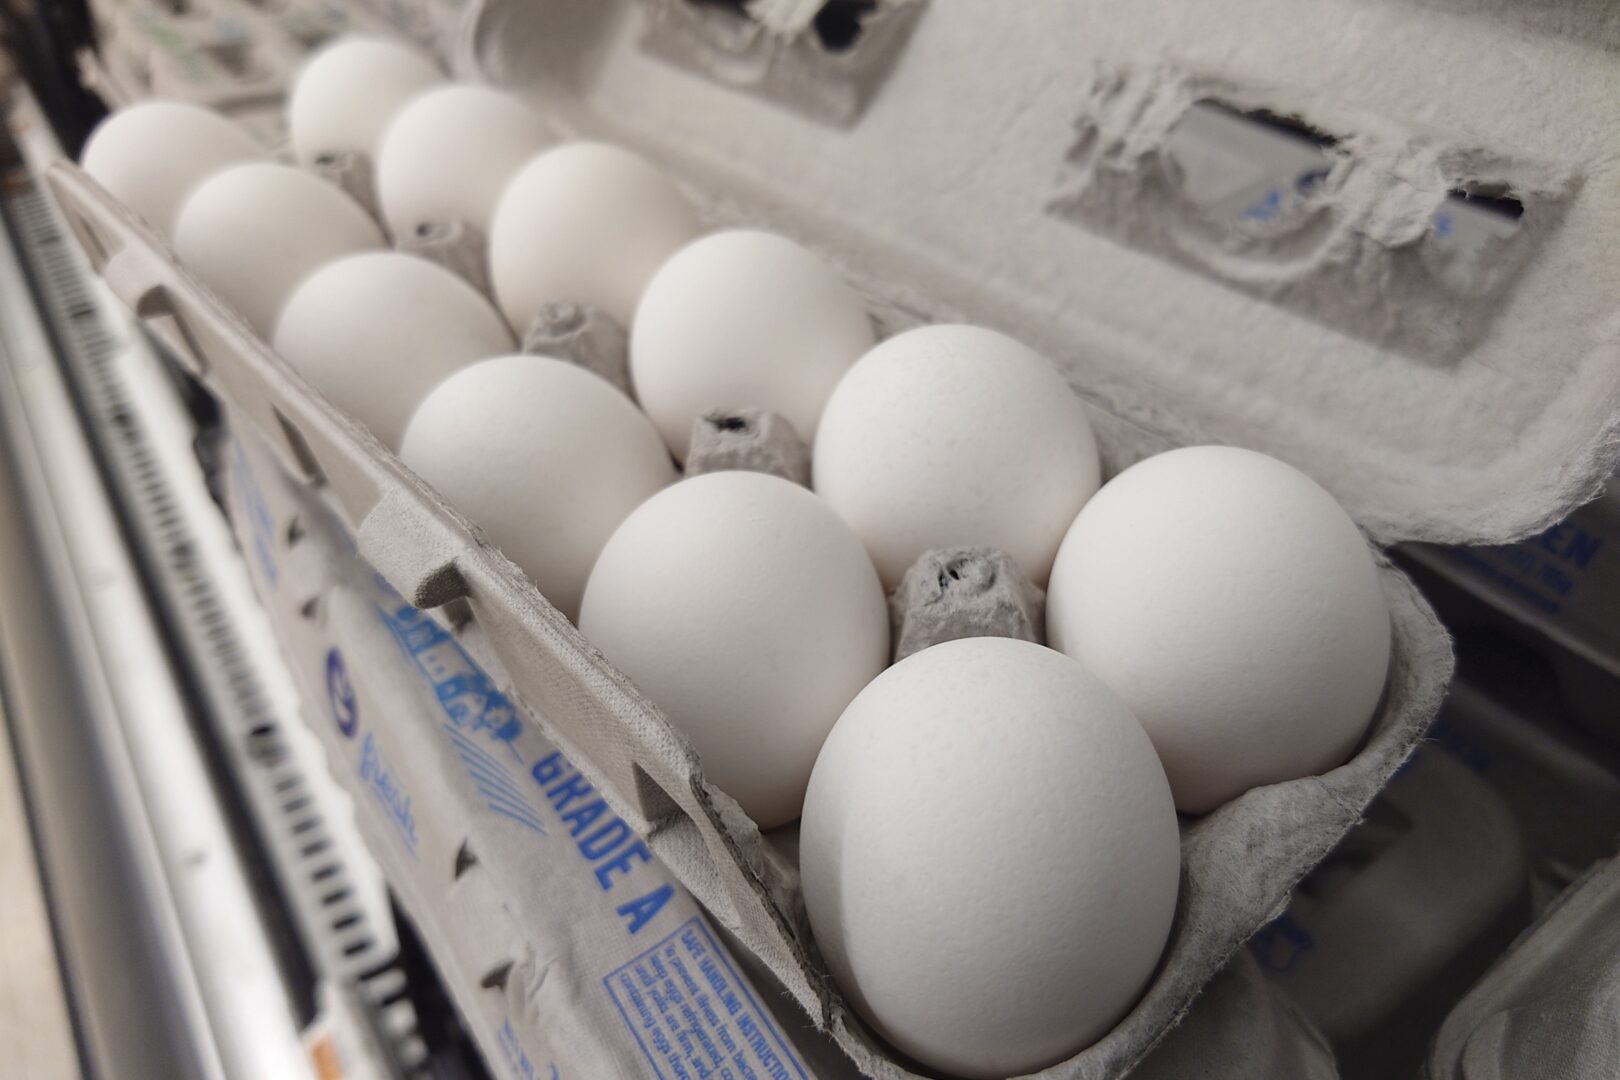 Show are eggs at a grocery story in Morrisville, Pa., Tuesday, Jan. 10, 2023. Anyone going to buy a dozen eggs these days will have to be ready to pay up because the lingering bird flu outbreak, combined with soaring feed, fuel and labor costs, has driven prices up significantly.